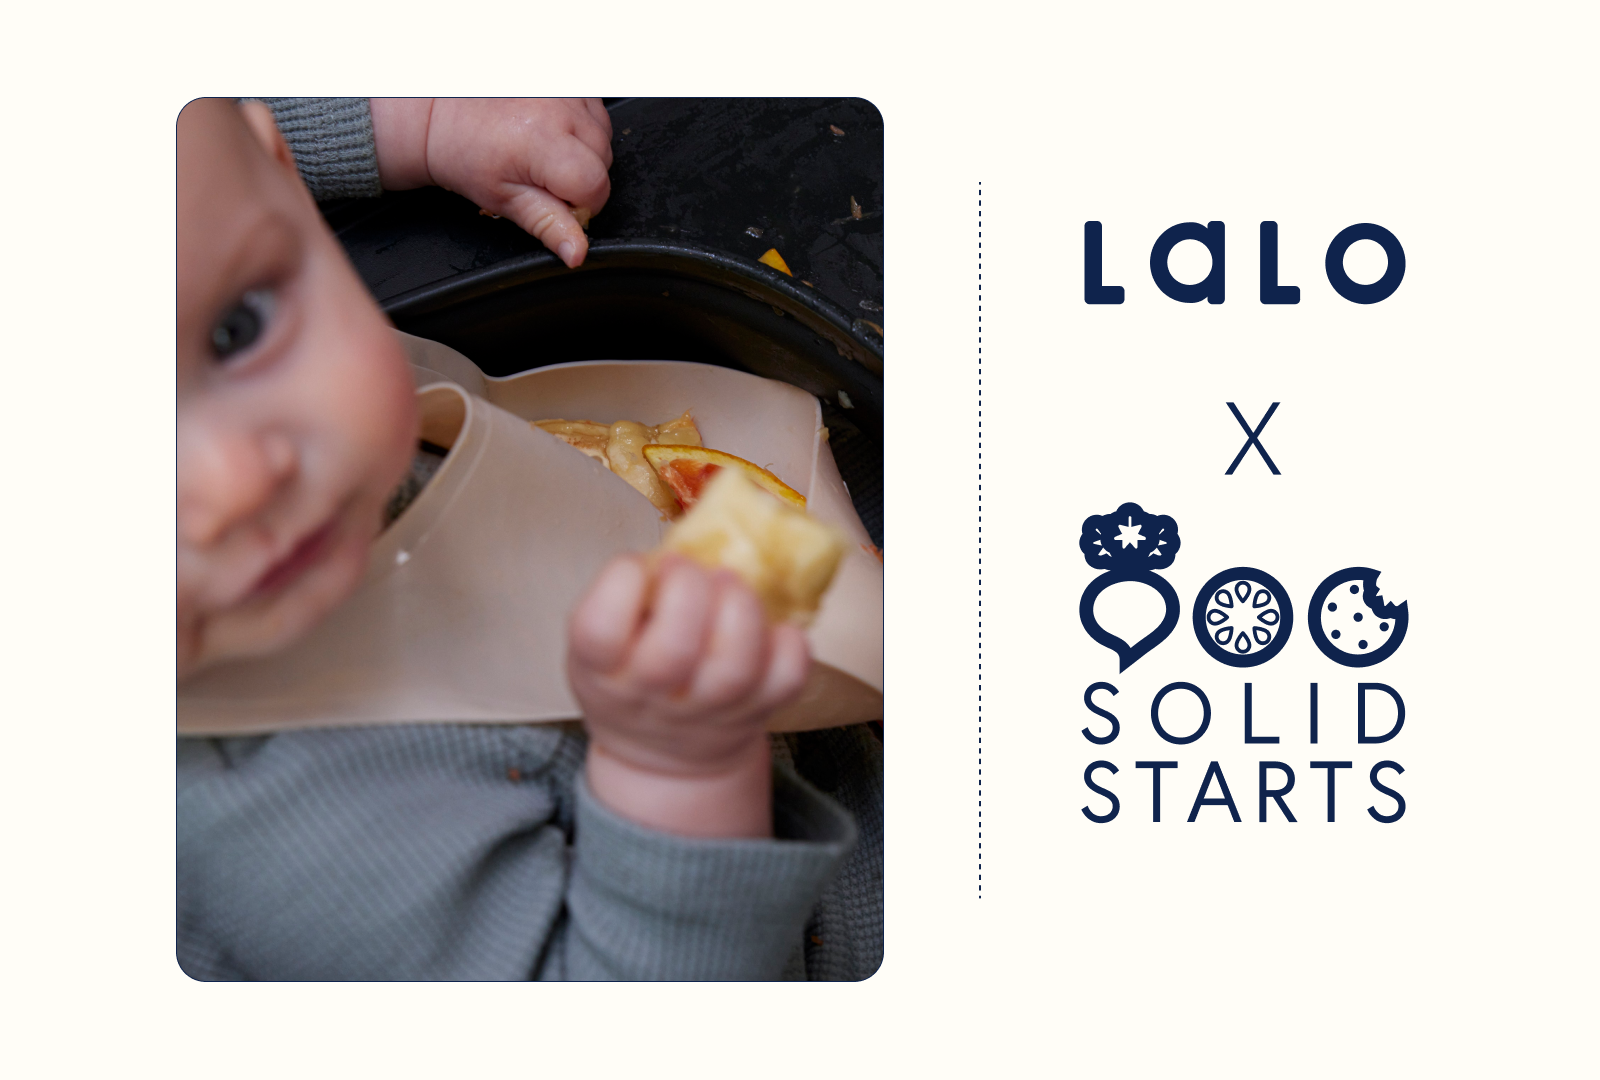 5 Essentials for Starting Solids